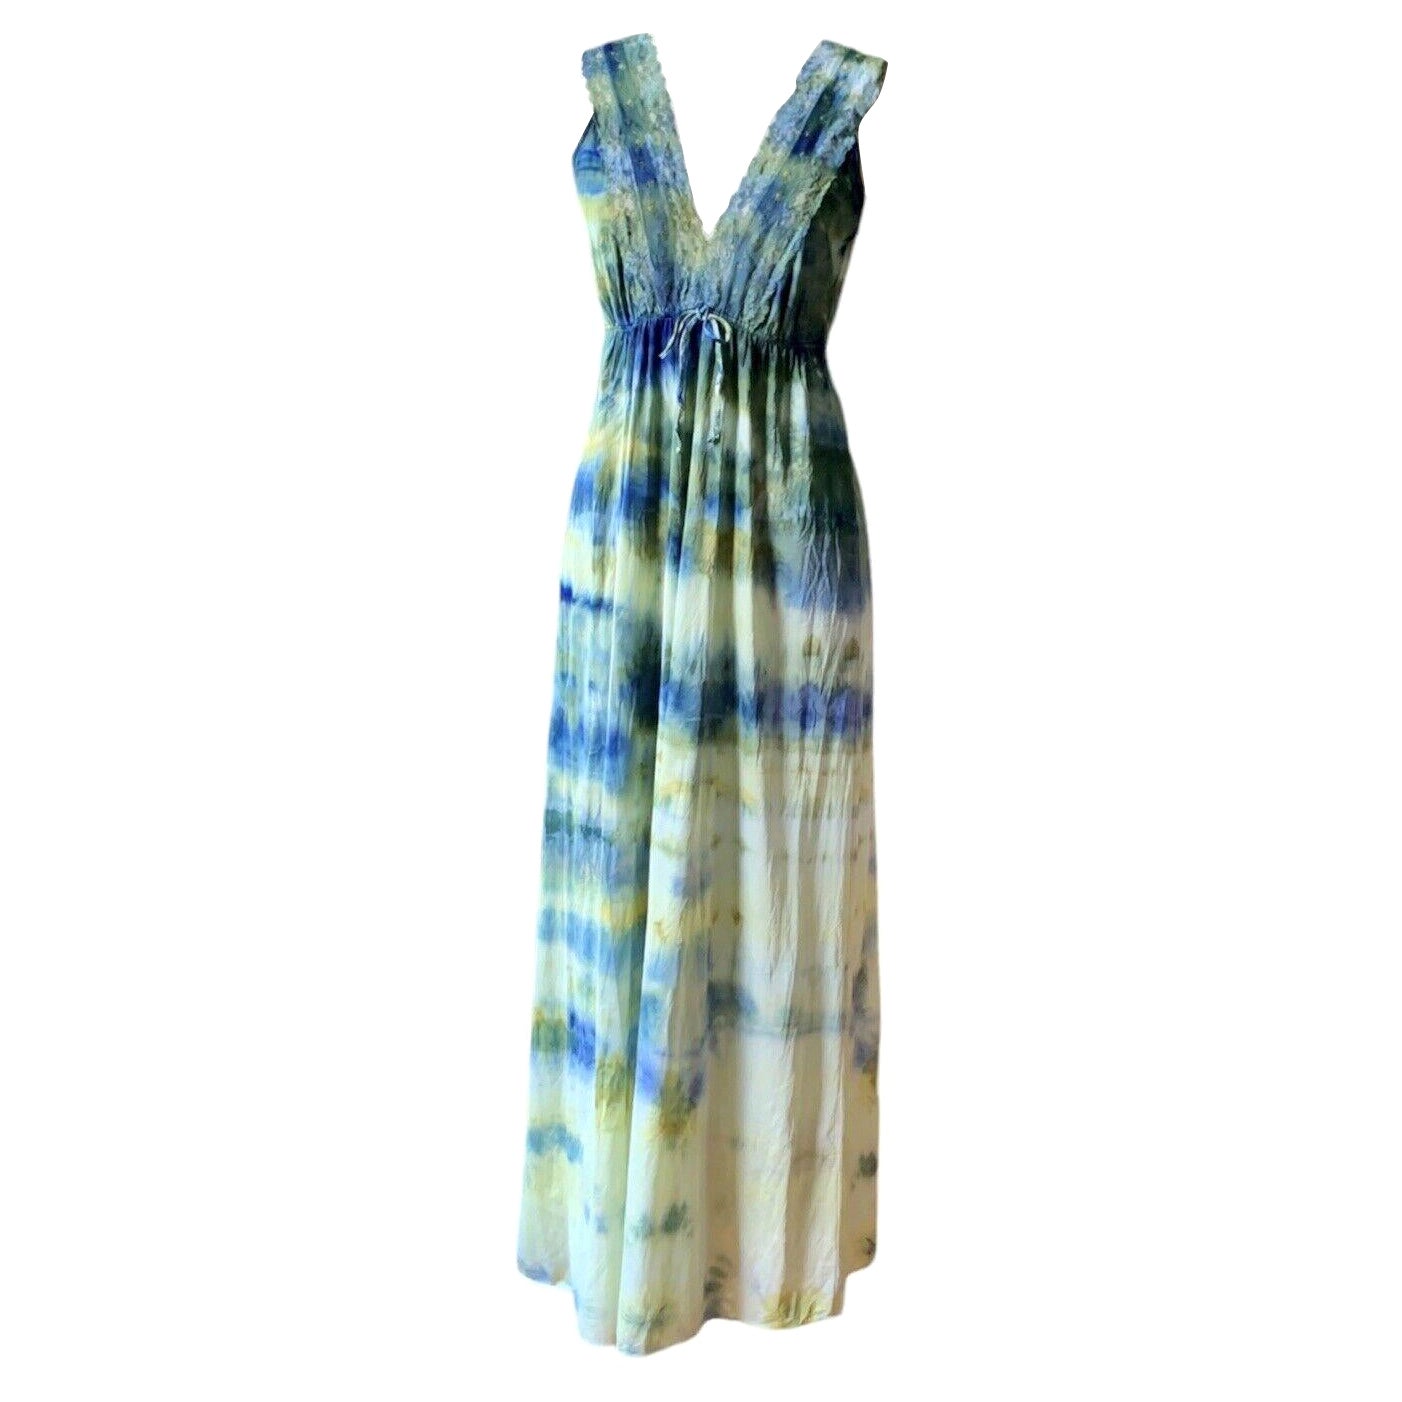 DYED PETALS Vintage Hand Botanically Dyed Tie-Dyed Slip Dress S/M 36